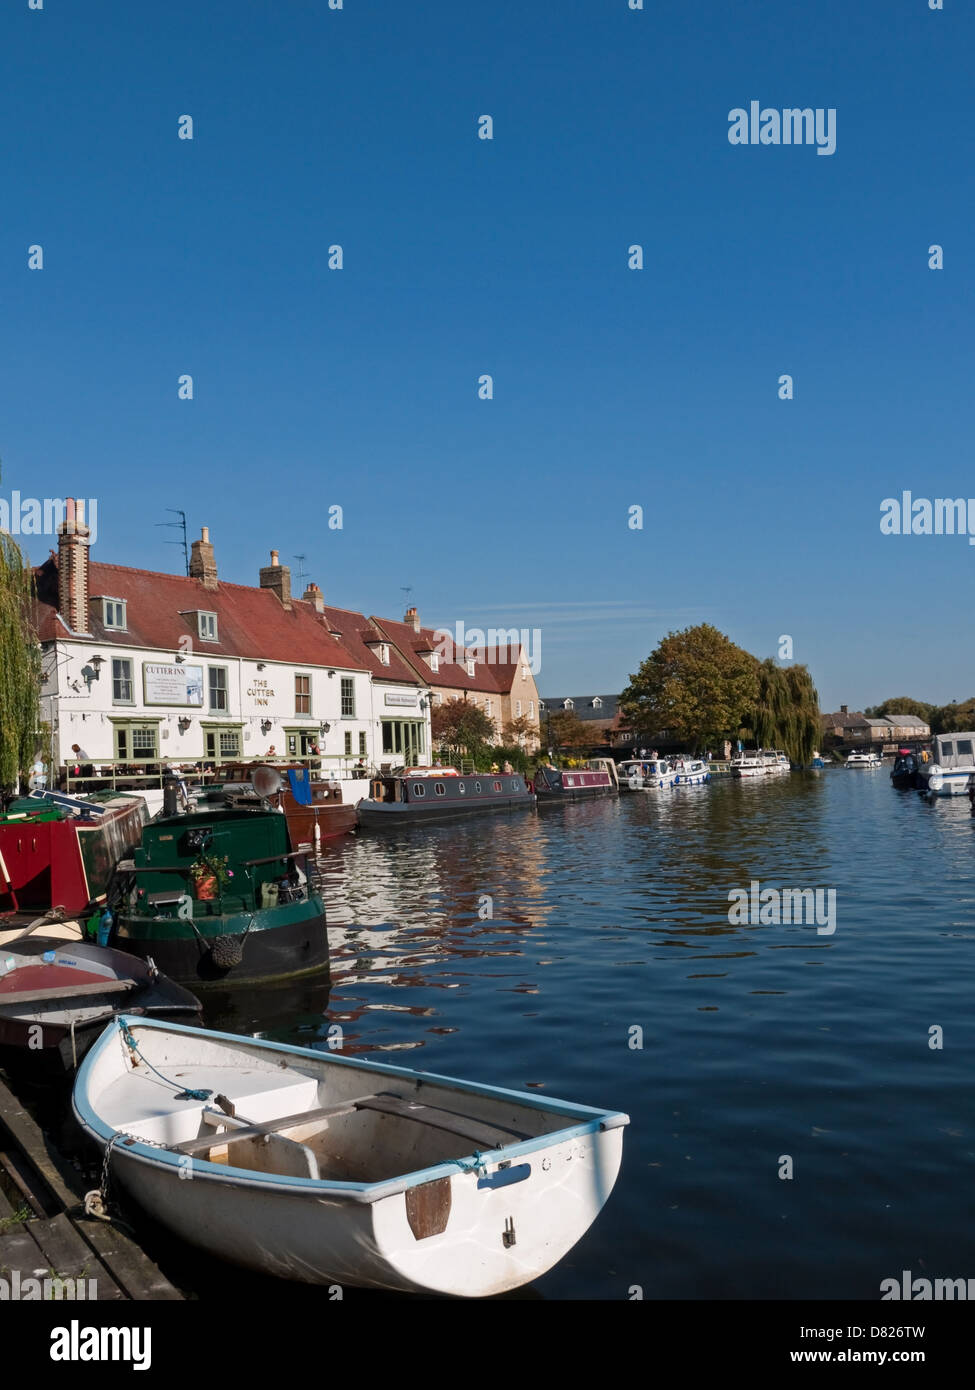 The Riverside of The River Great Ouse at Ely, Cambridgeshire, England Stock Photo